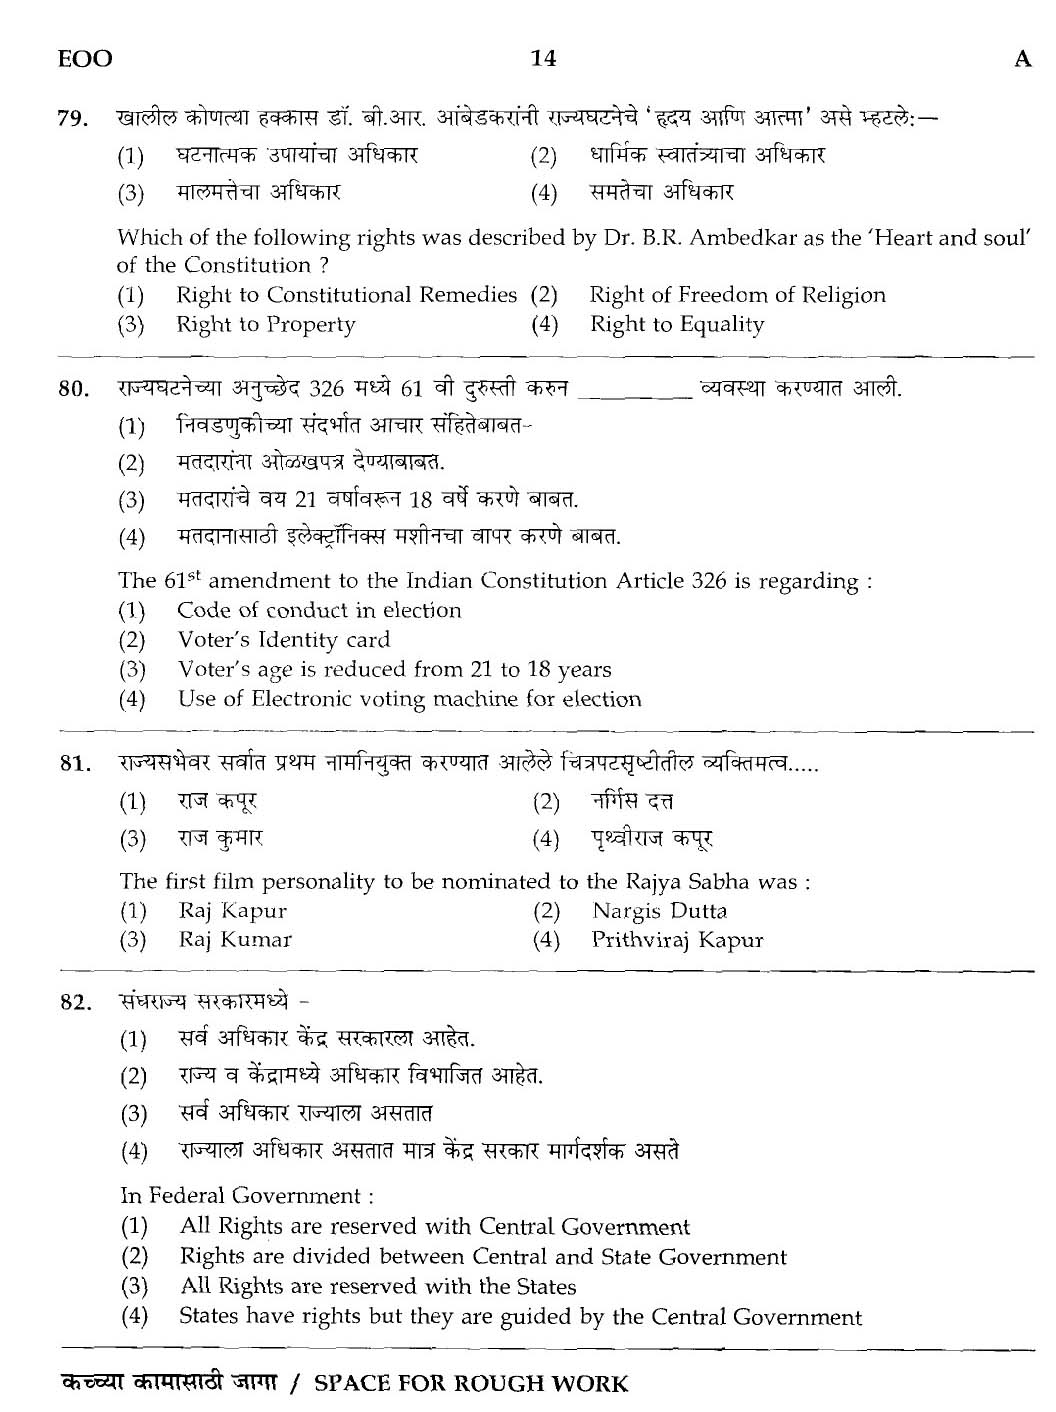 MPSC Agricultural Services Preliminary Exam 2012 Question Paper 13